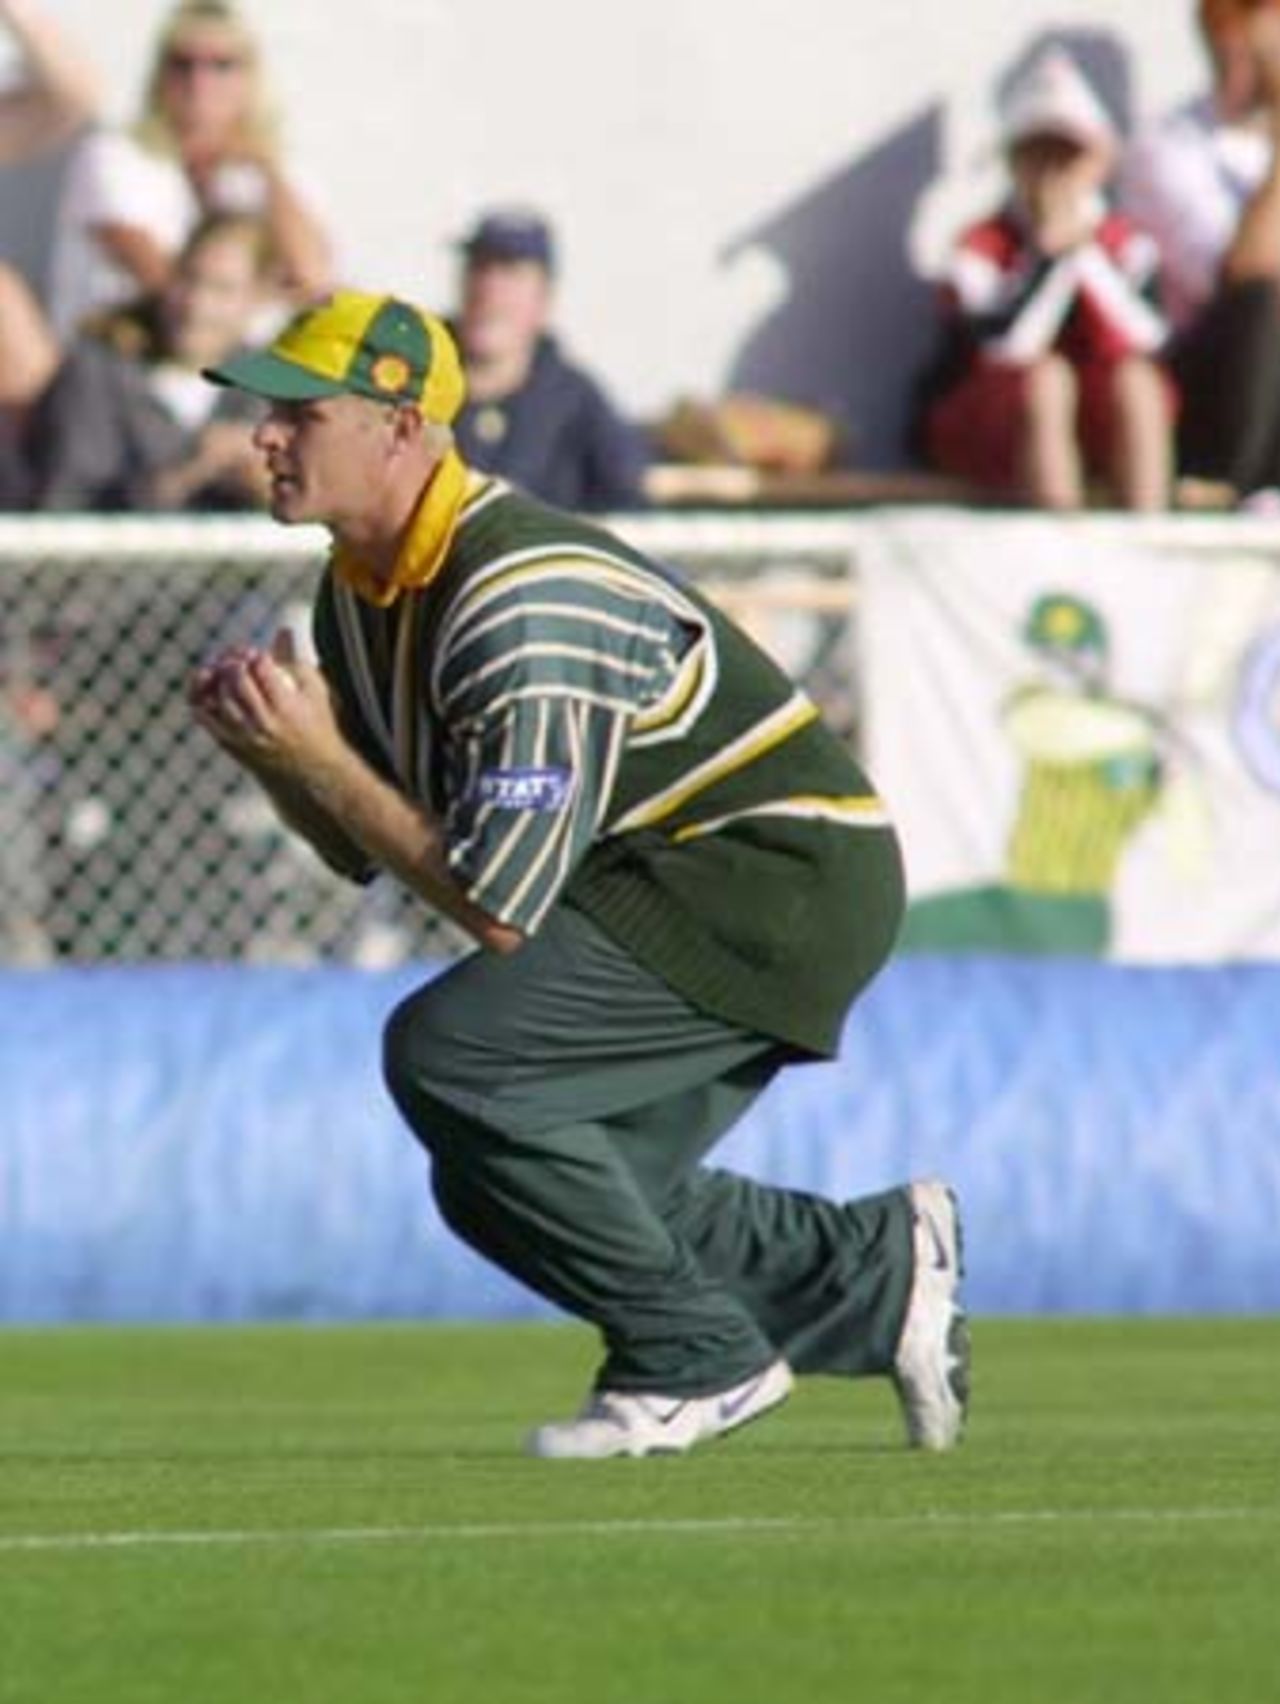 Central Districts fielder Glen Sulzberger safely completes a catch to dismiss Canterbury pinch-hitter Stephen Cunis for 24 off the bowling of Jacob Oram. 2nd Shell Cup Final: Canterbury v Central Districts at Jade Stadium, Christchurch, 27 January 2001.